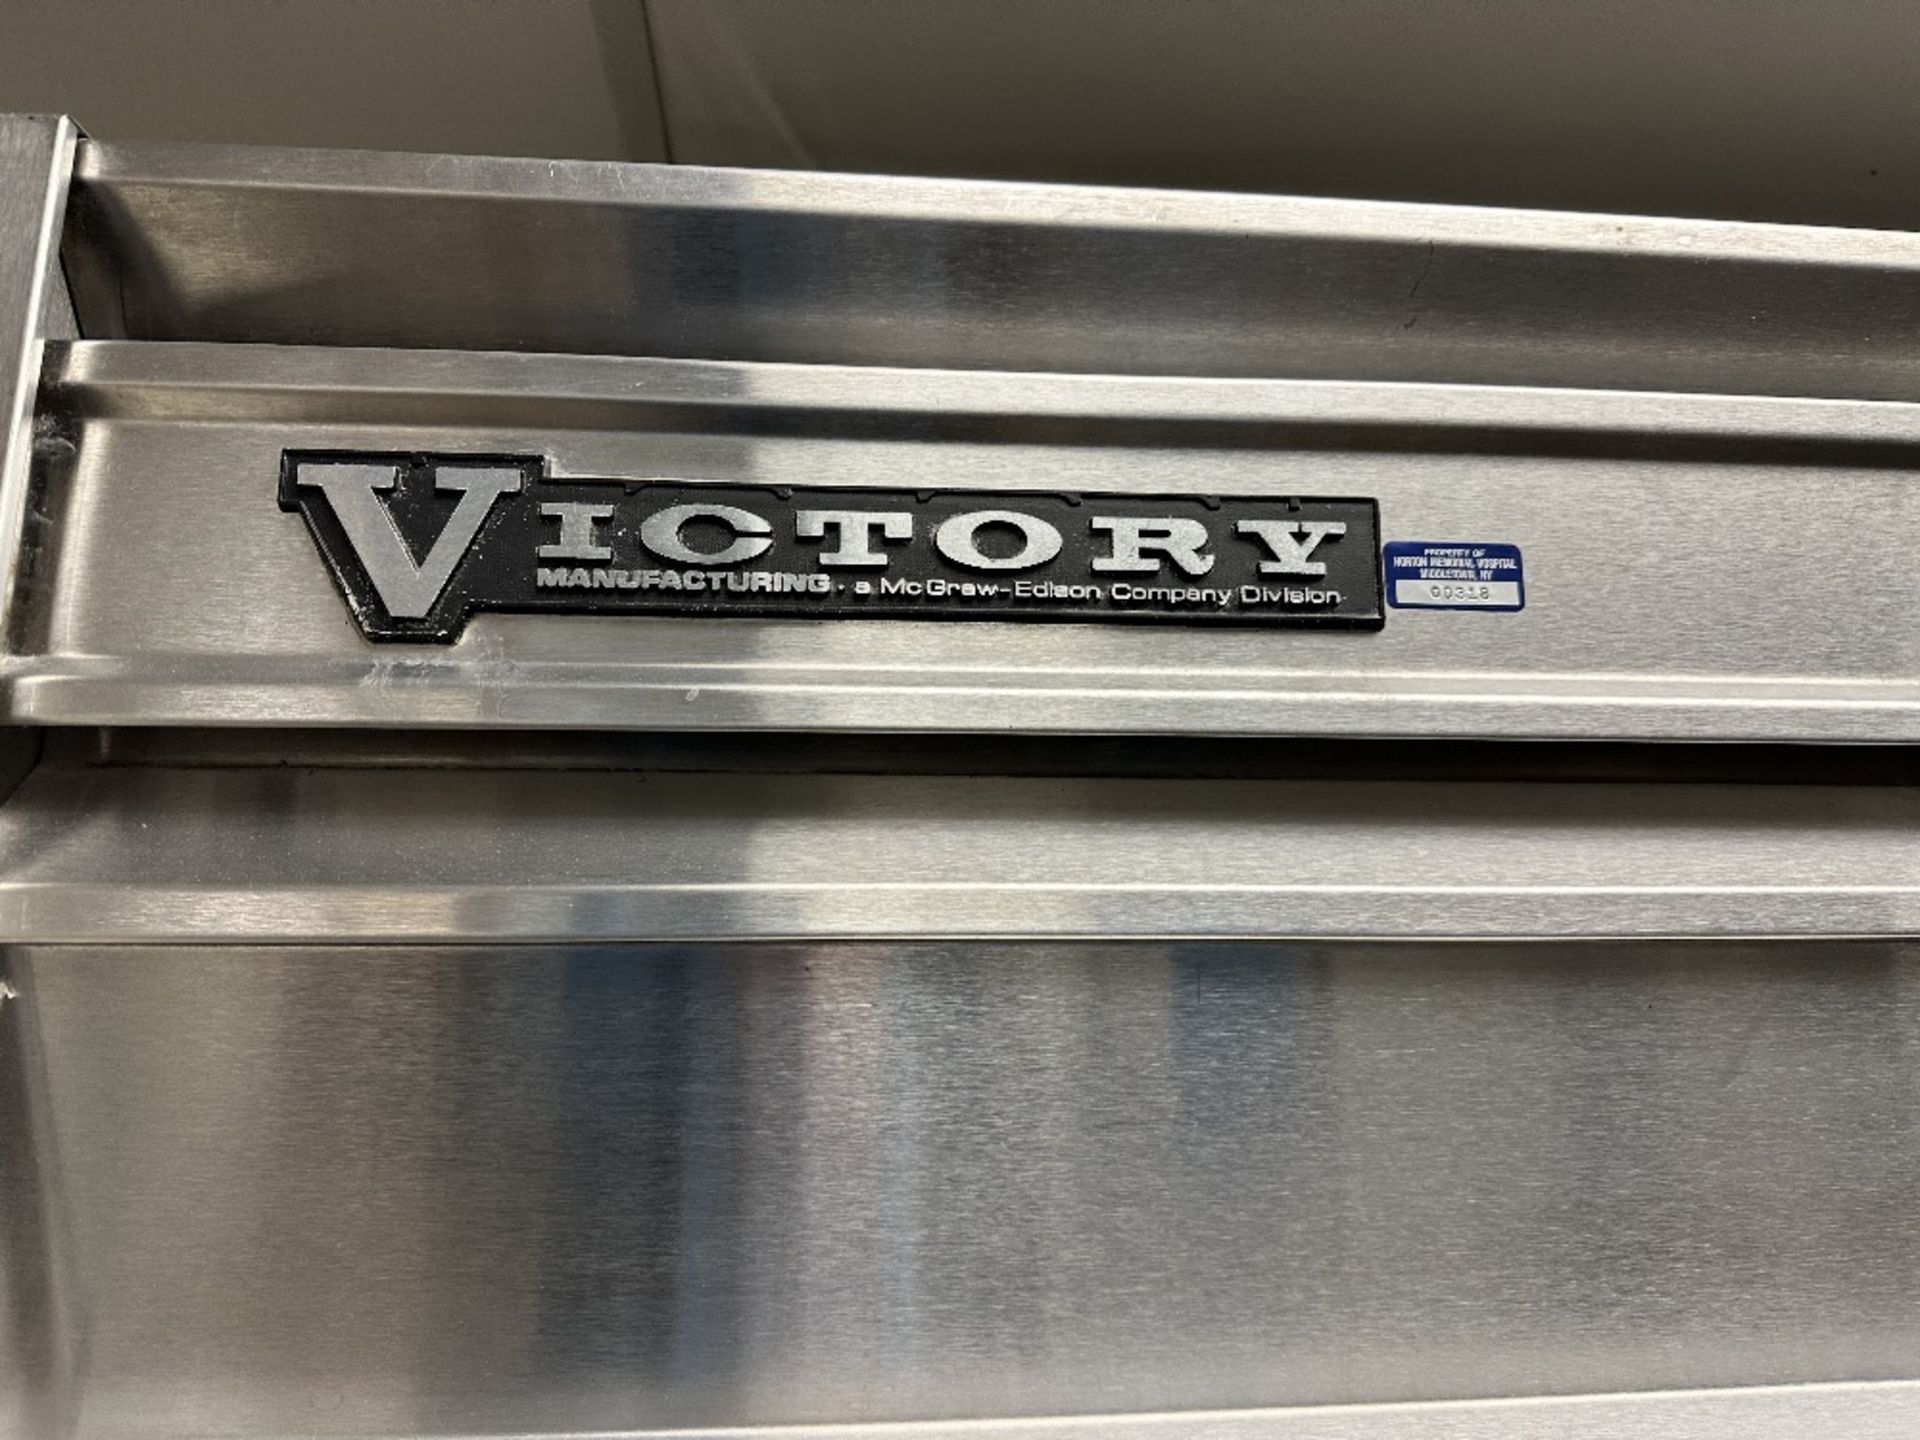 Victory is-30-s3 3 Door Commercial Refrigerator (LOCATED IN MIDDLETOWN, N.Y.)-FOR PACKAGING & - Image 2 of 3